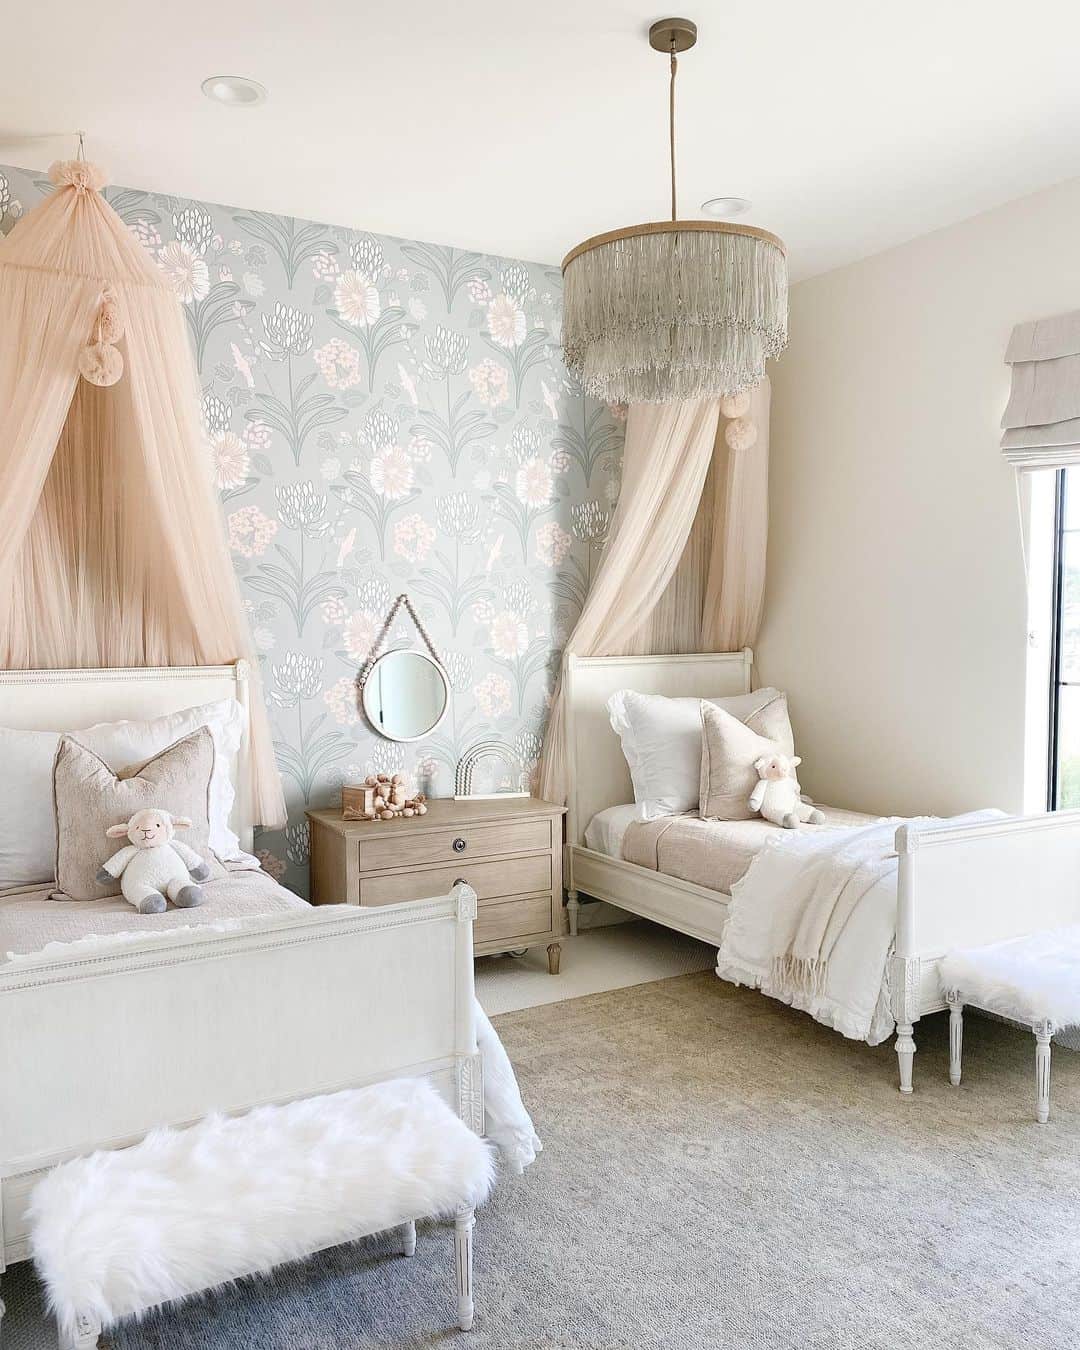 Soft Pink and Blue Accents in Kids' Room Design